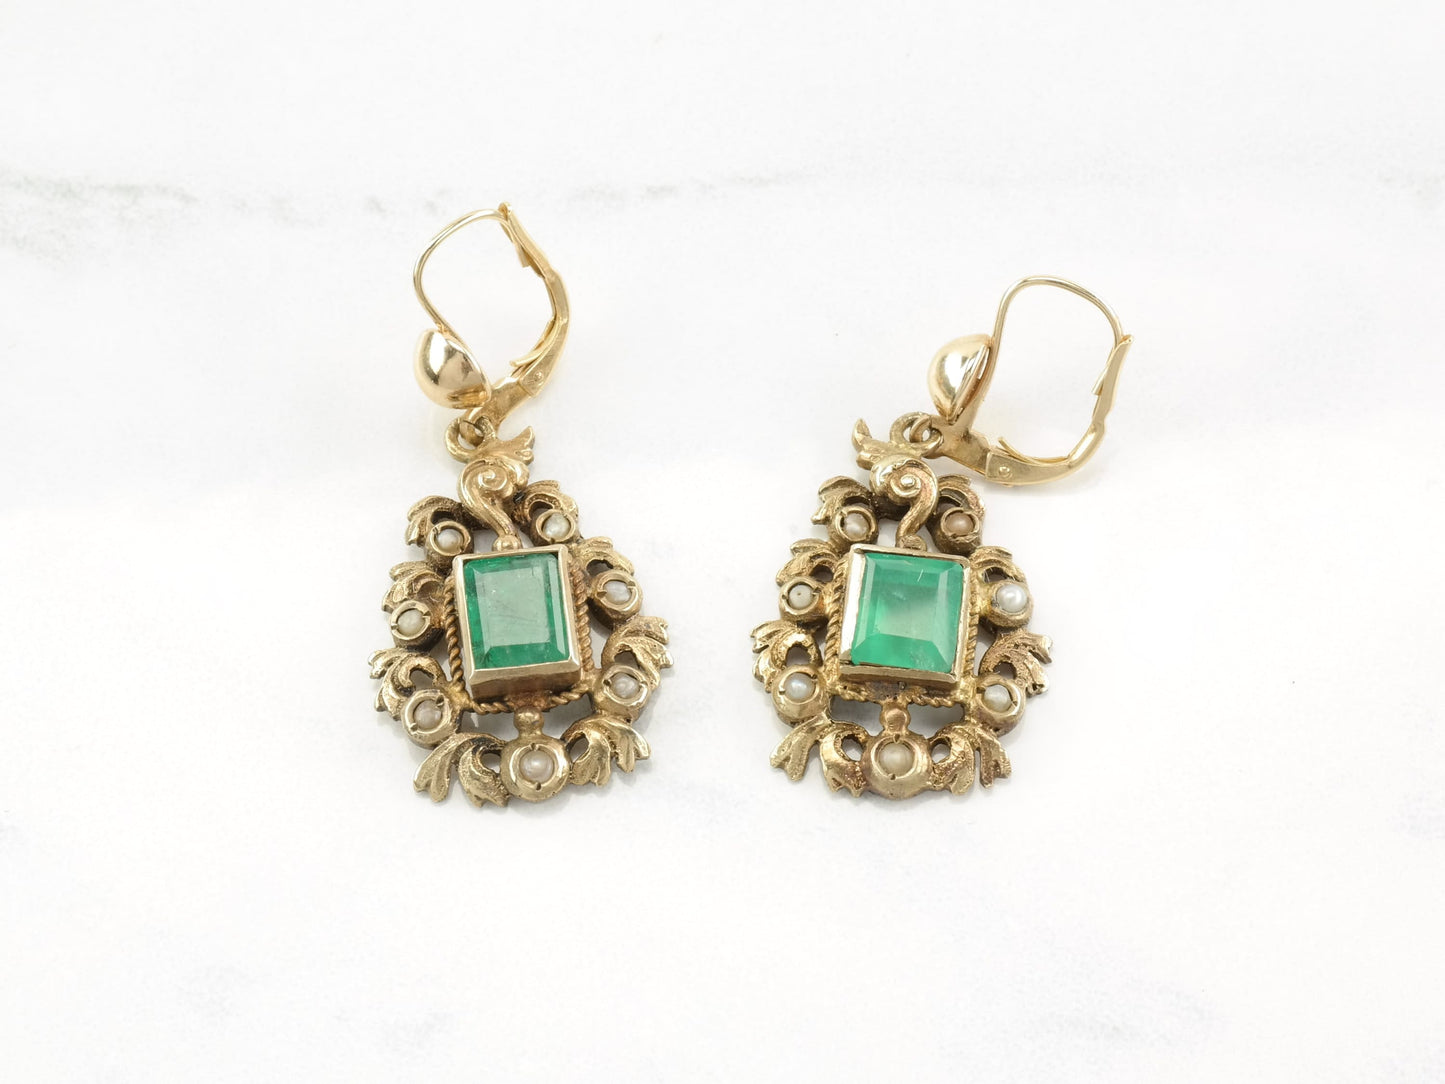 Vintage Gold Gilded Emerald Jewelry Set Colombian Emeralds Green Beryl & Cultured pearls Sterling Silver